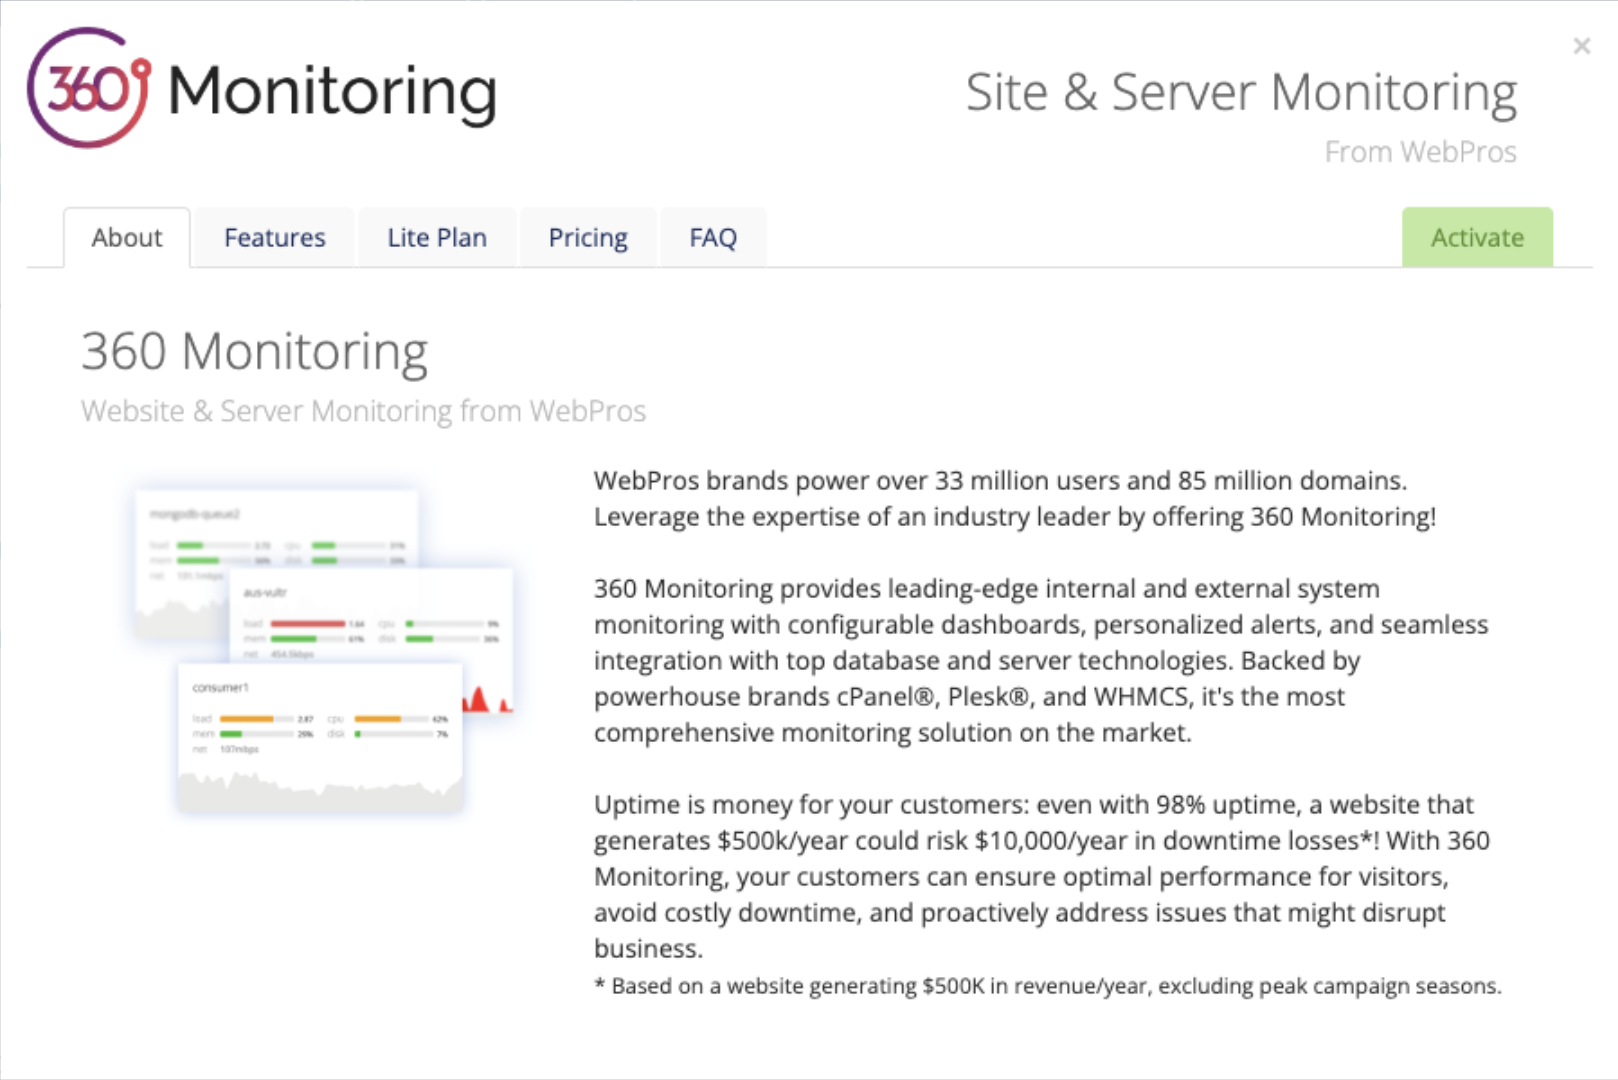 Configuring 360 Monitoring in the Admin Area